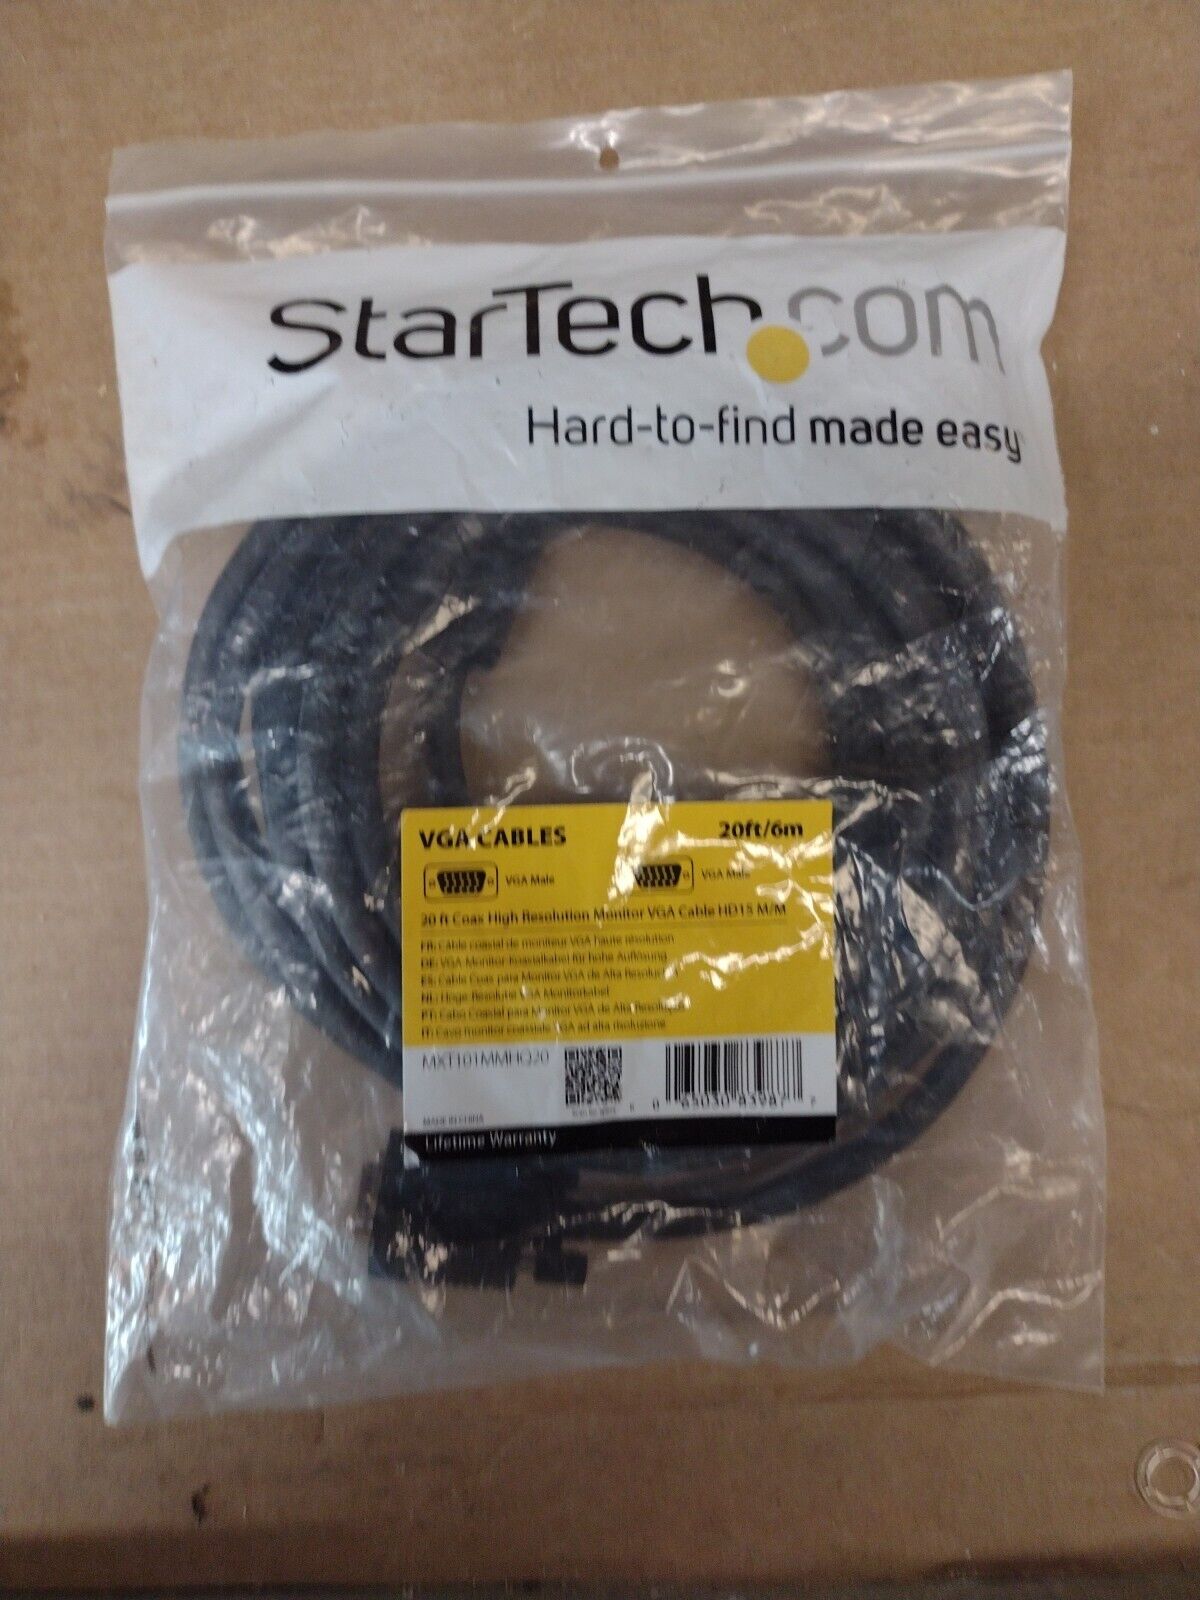 New StarTech VGA Cable 20 ft Coax High Resolution Monitor VGA Cable HD 15 M/M